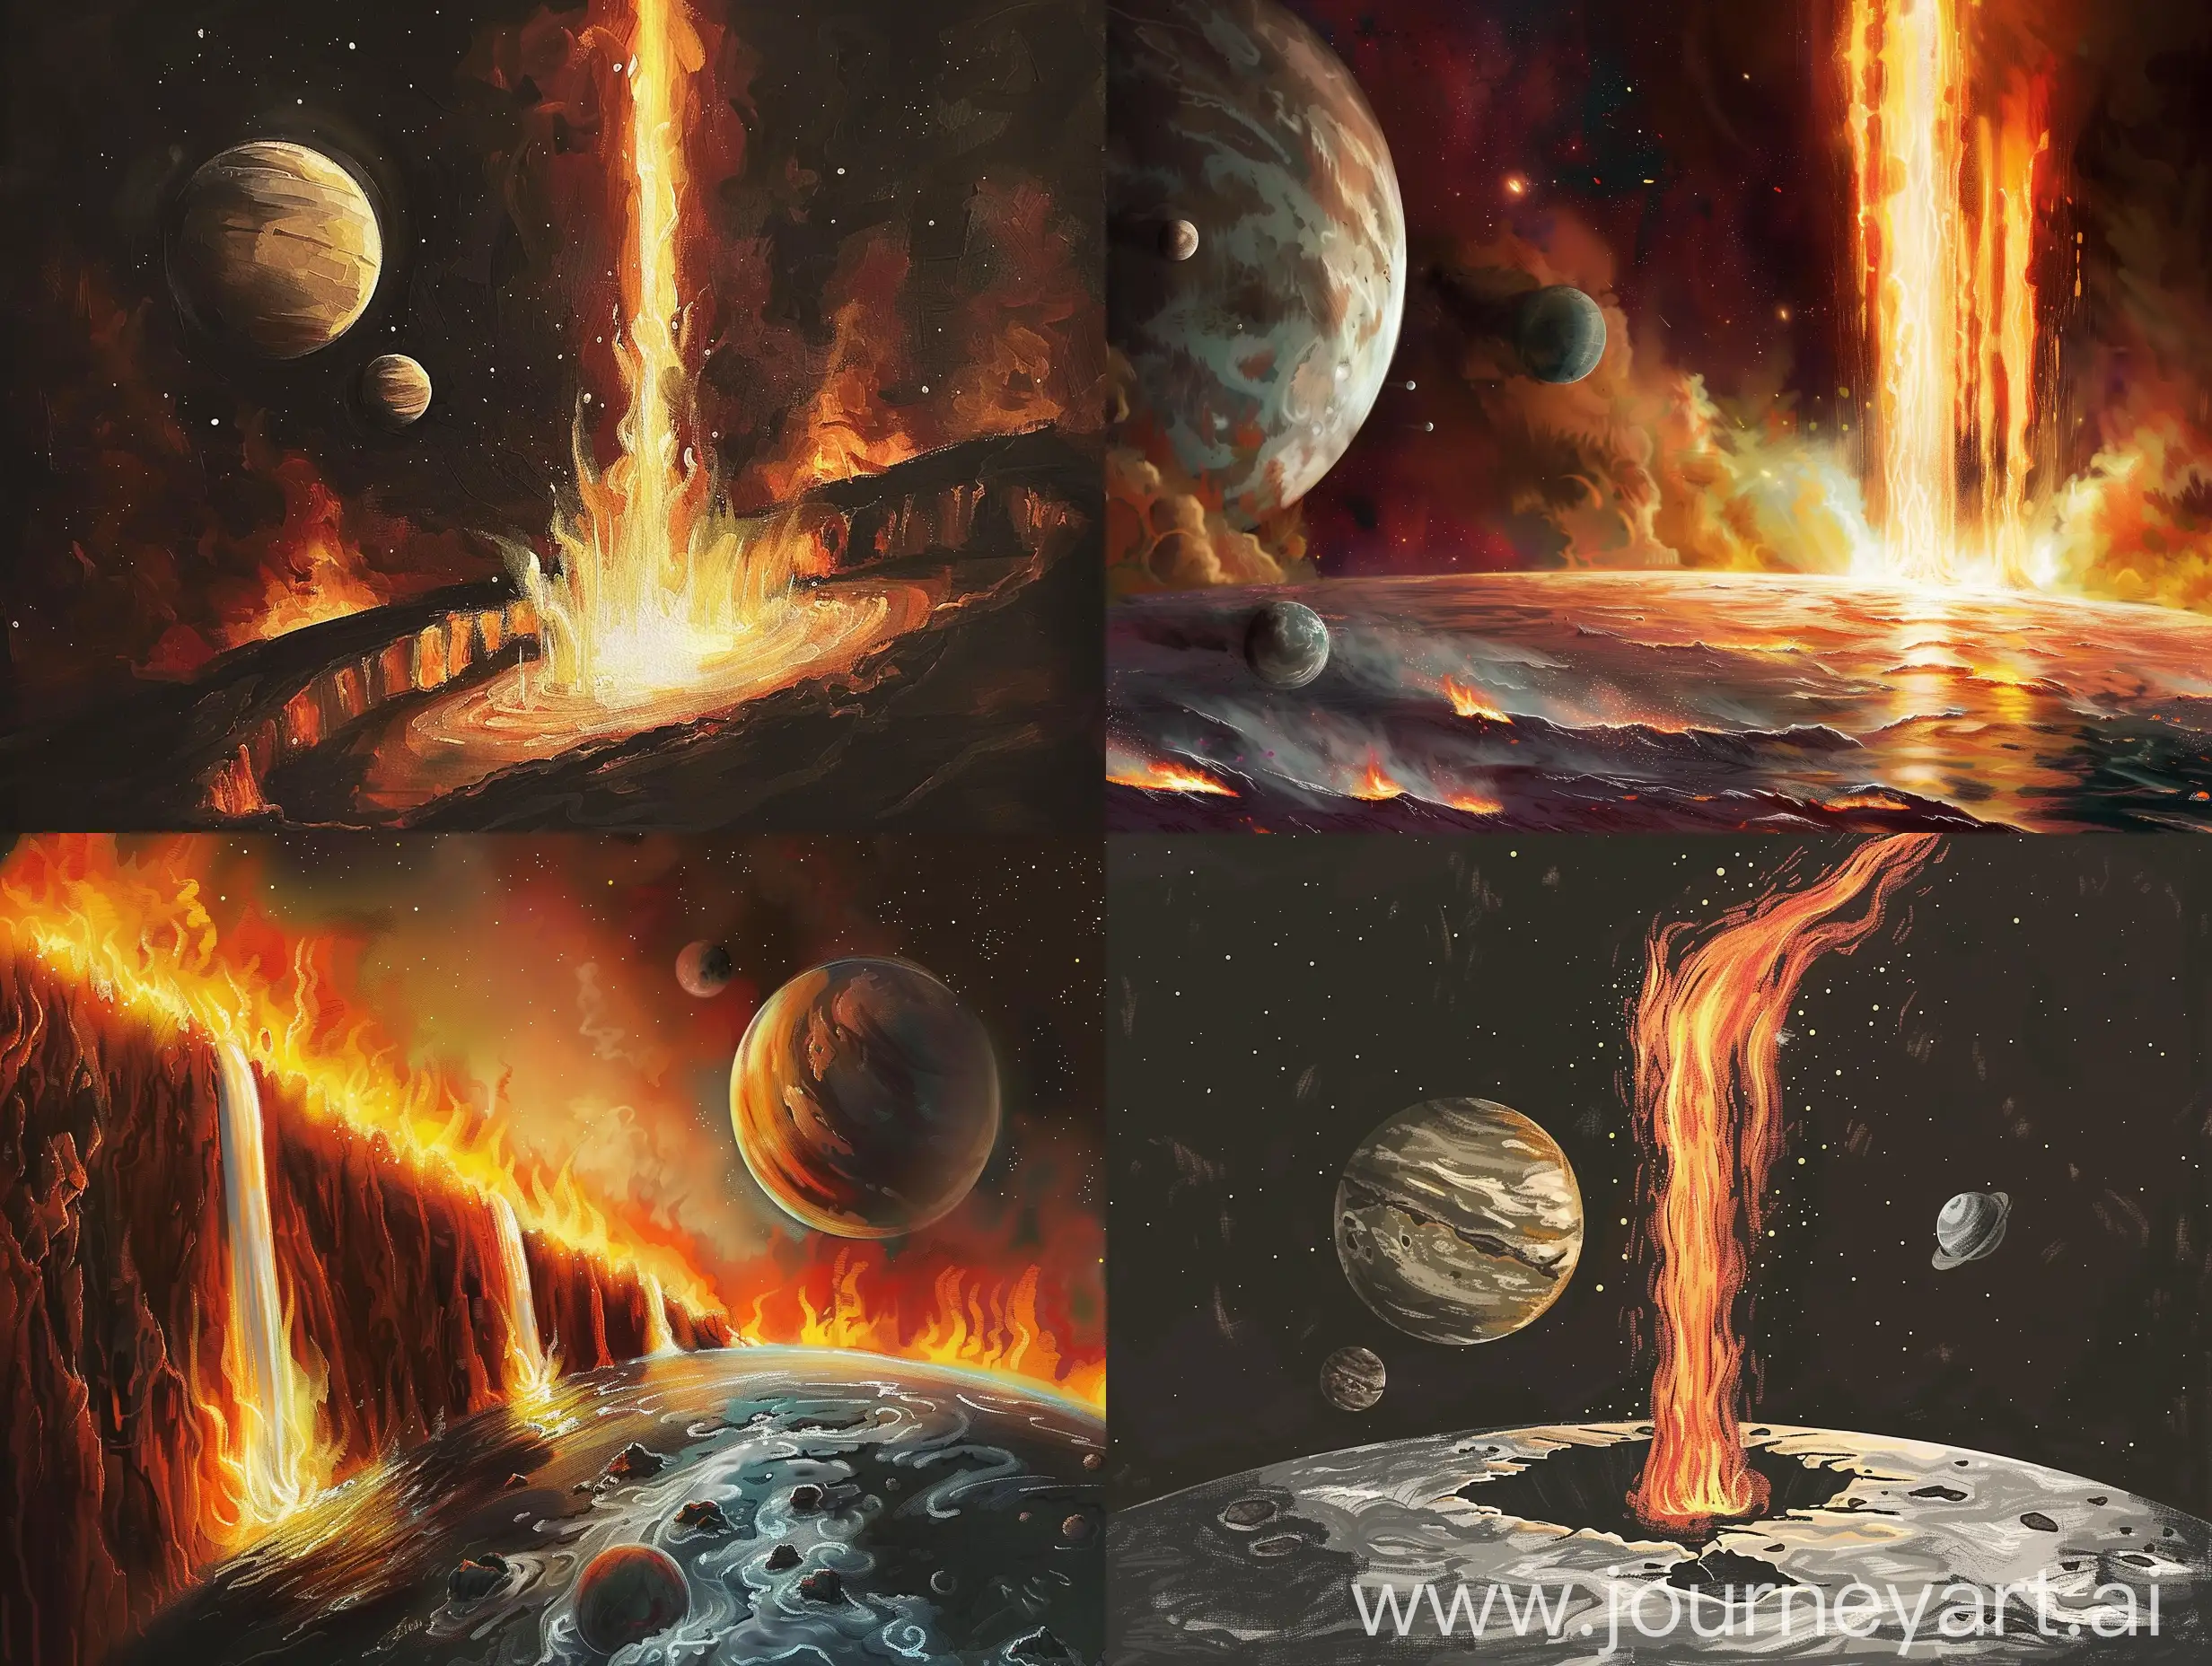 draw a fire waterfall falling from on planet onto another planet